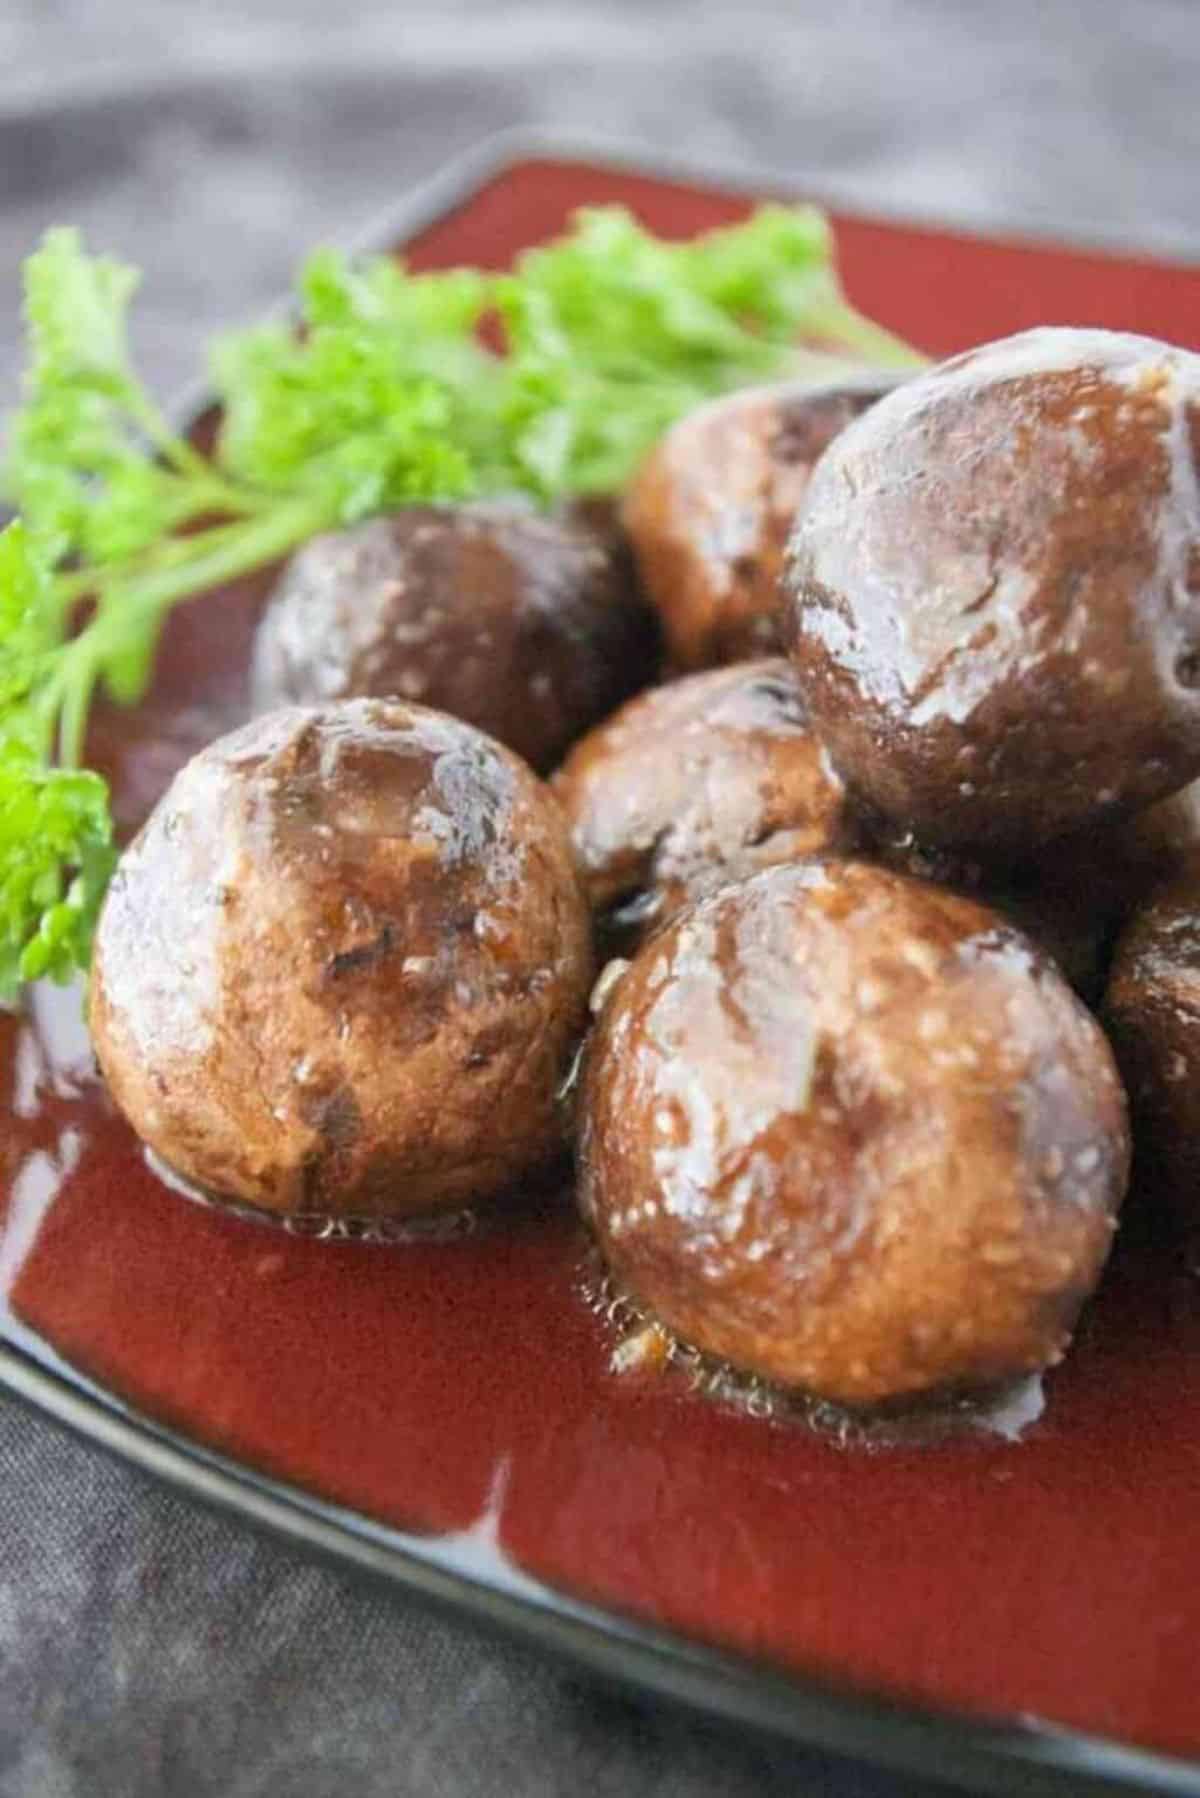 Delicious Slow Cooker Italian Mushrooms on a red plate.